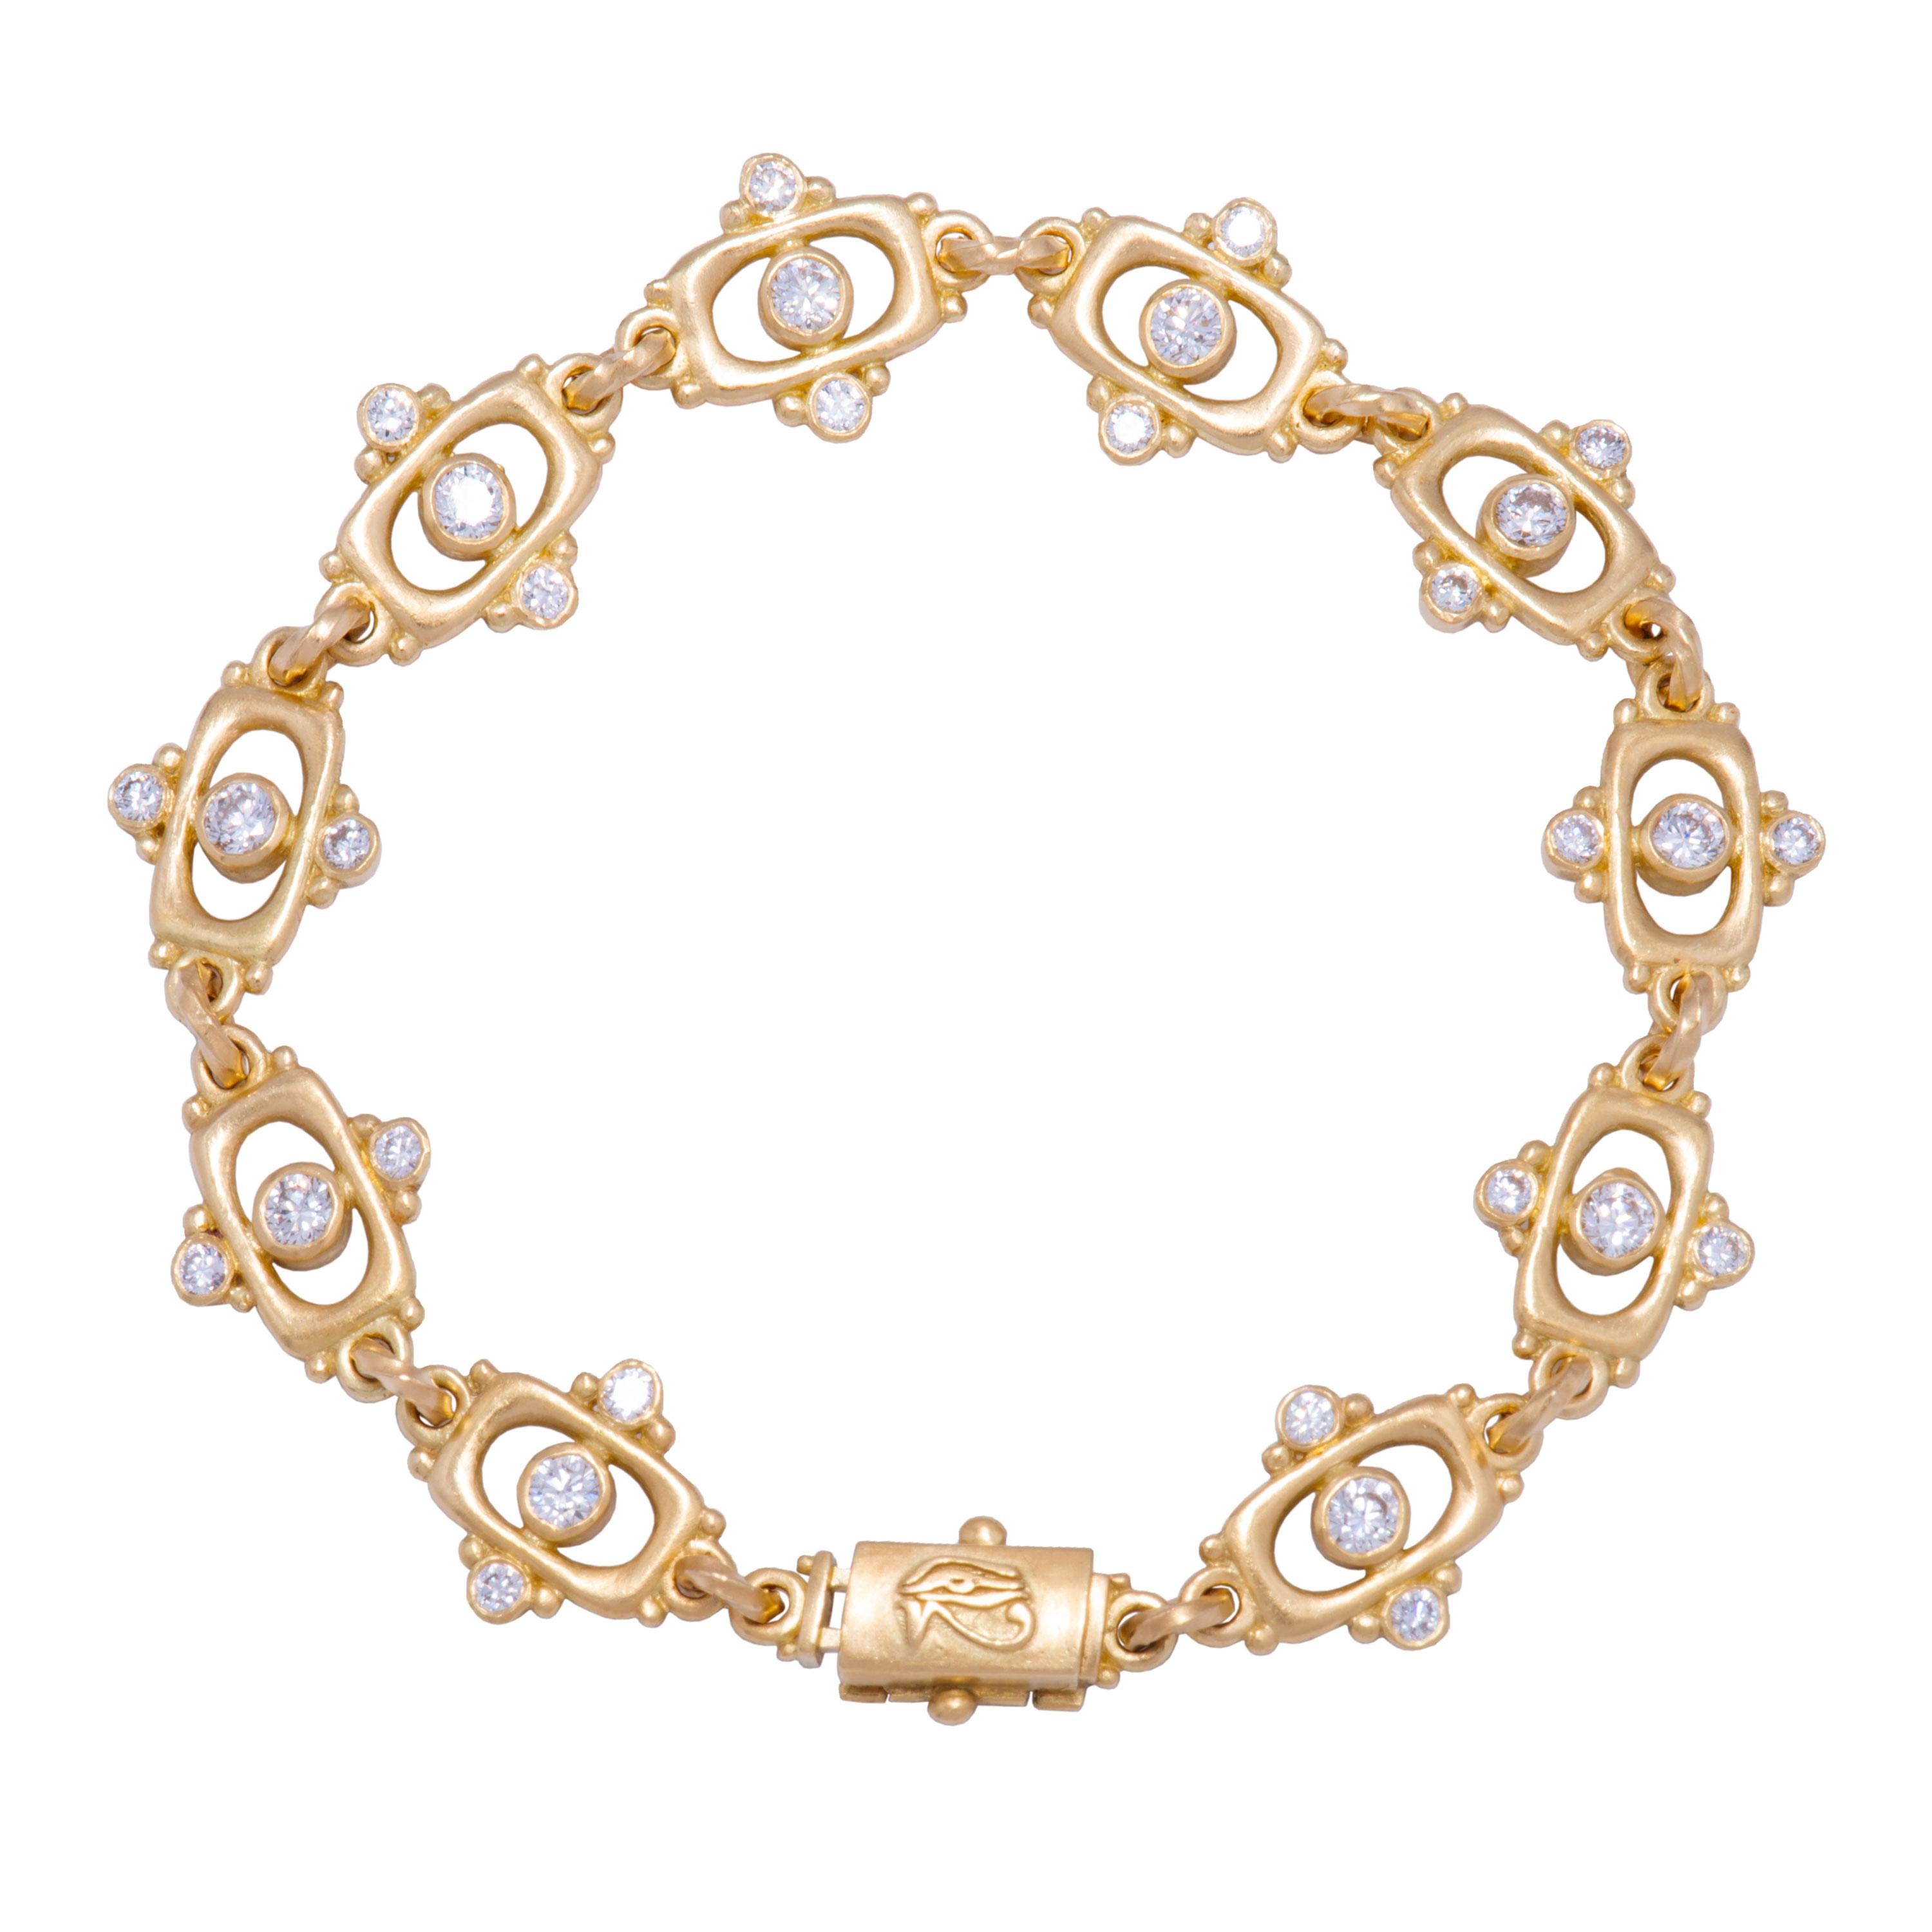 Ten 18k gold tabla links are studded with gold beads and bright white diamonds 1.6tcw to make a strikingly beautiful bracelet that is comfortable enough to ear every day. At 7